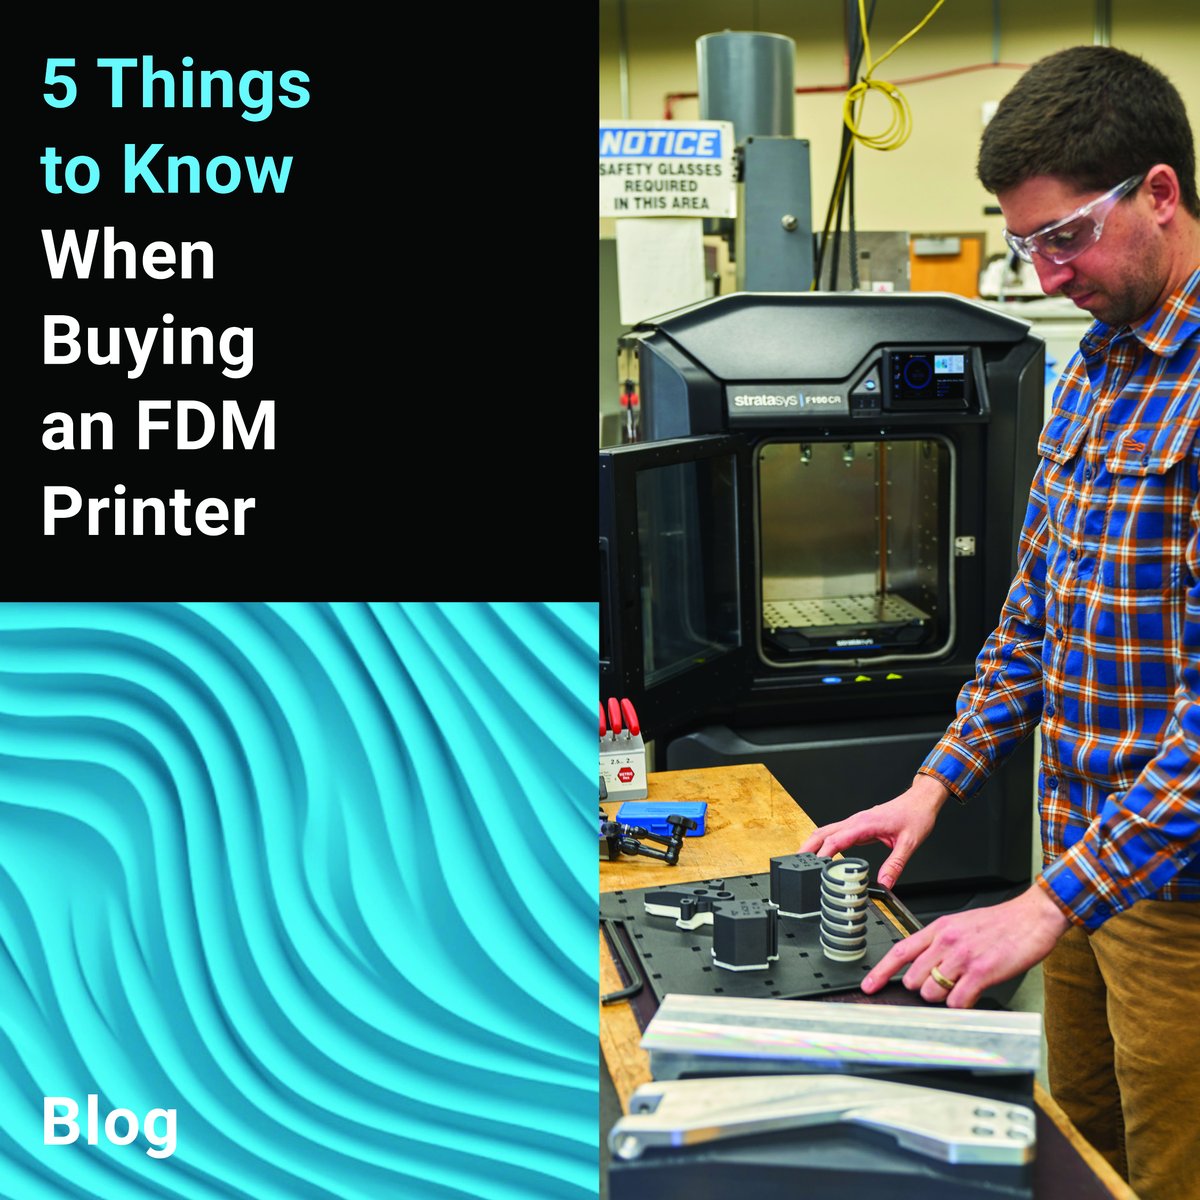 Looking to leap into the exciting realm of #additivemanufacturing? Check our guide on what to consider when selecting the perfect FDM printer for your needs >> okt.to/9rme1b
Elevate your creations with the power of Stratasys FDM printers!
#MakeAdditiveWorkForYou